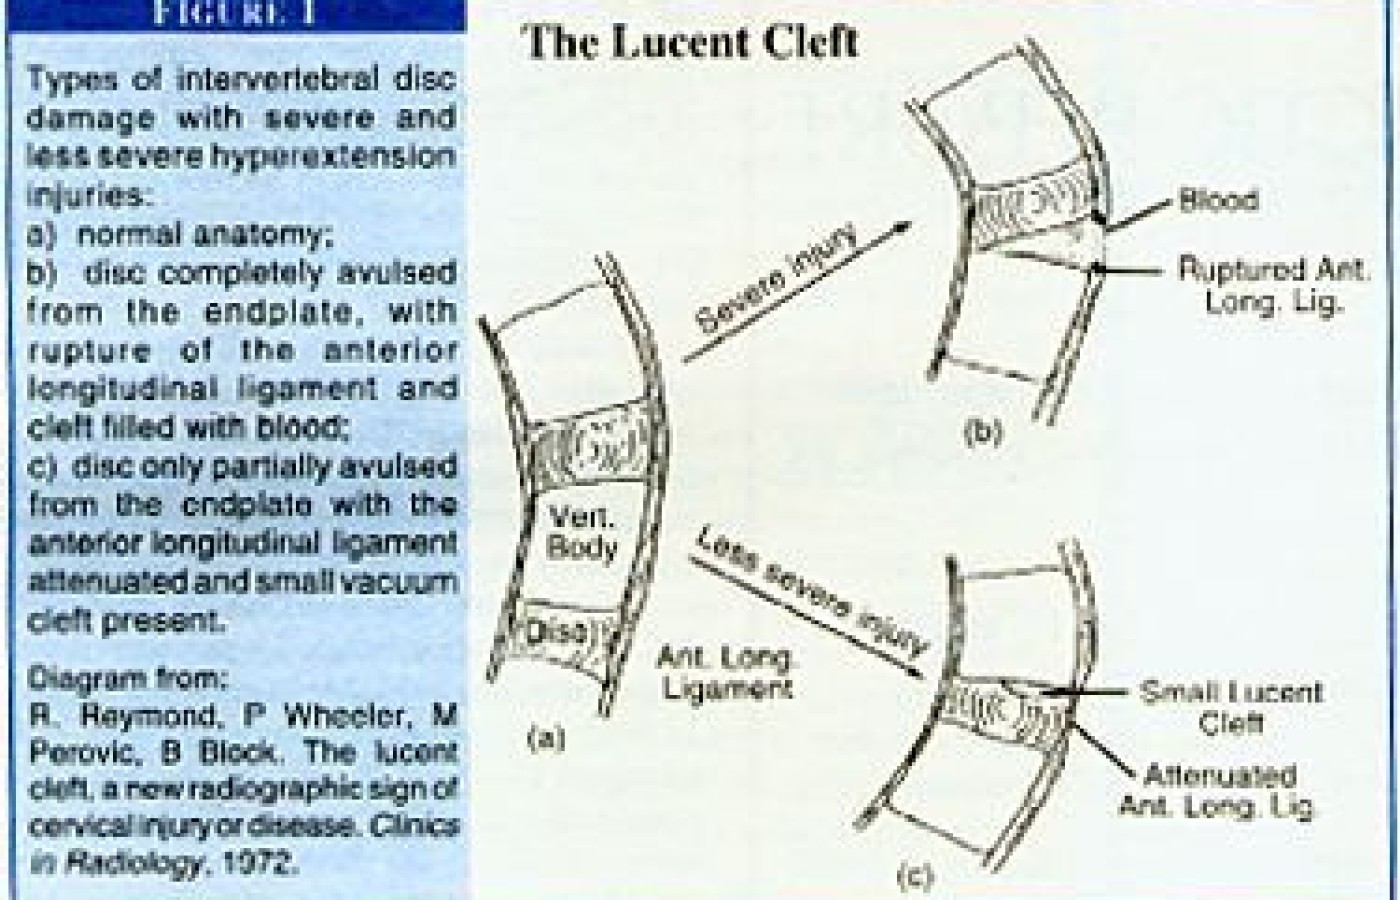 The Lucent Cleft